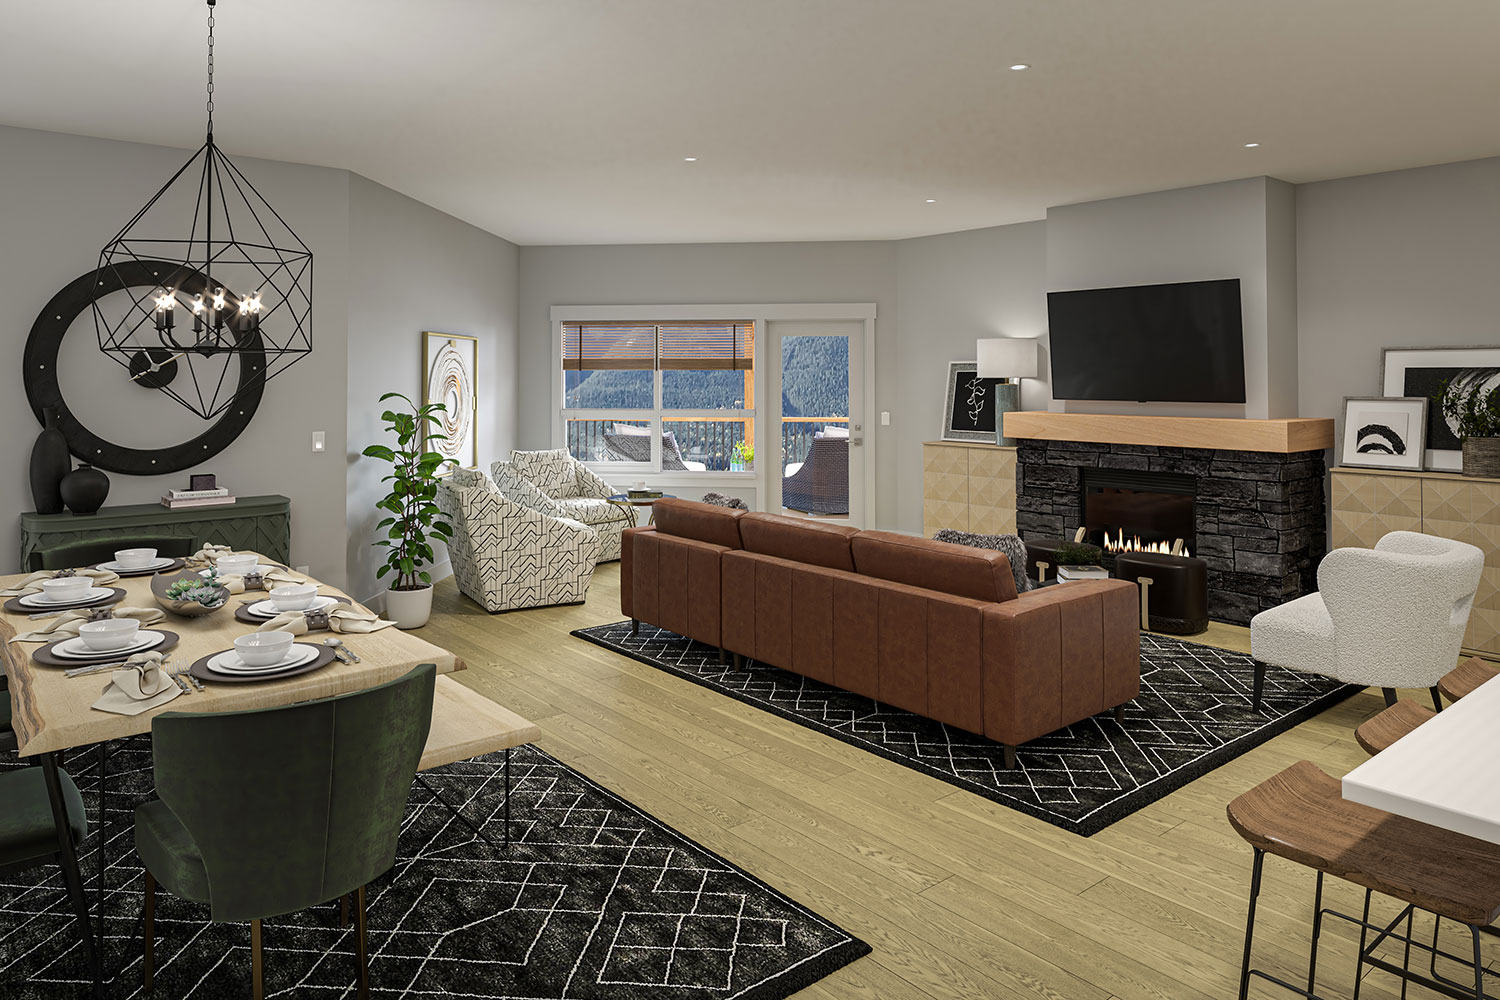 A 1,800-square-foot condo at Jack Pine Lodge in the heart of Canmore’s Spring Creek community is the early bird prize in this year's Foothills Hospital Home Lottery.
Courtesy of MK Design Group